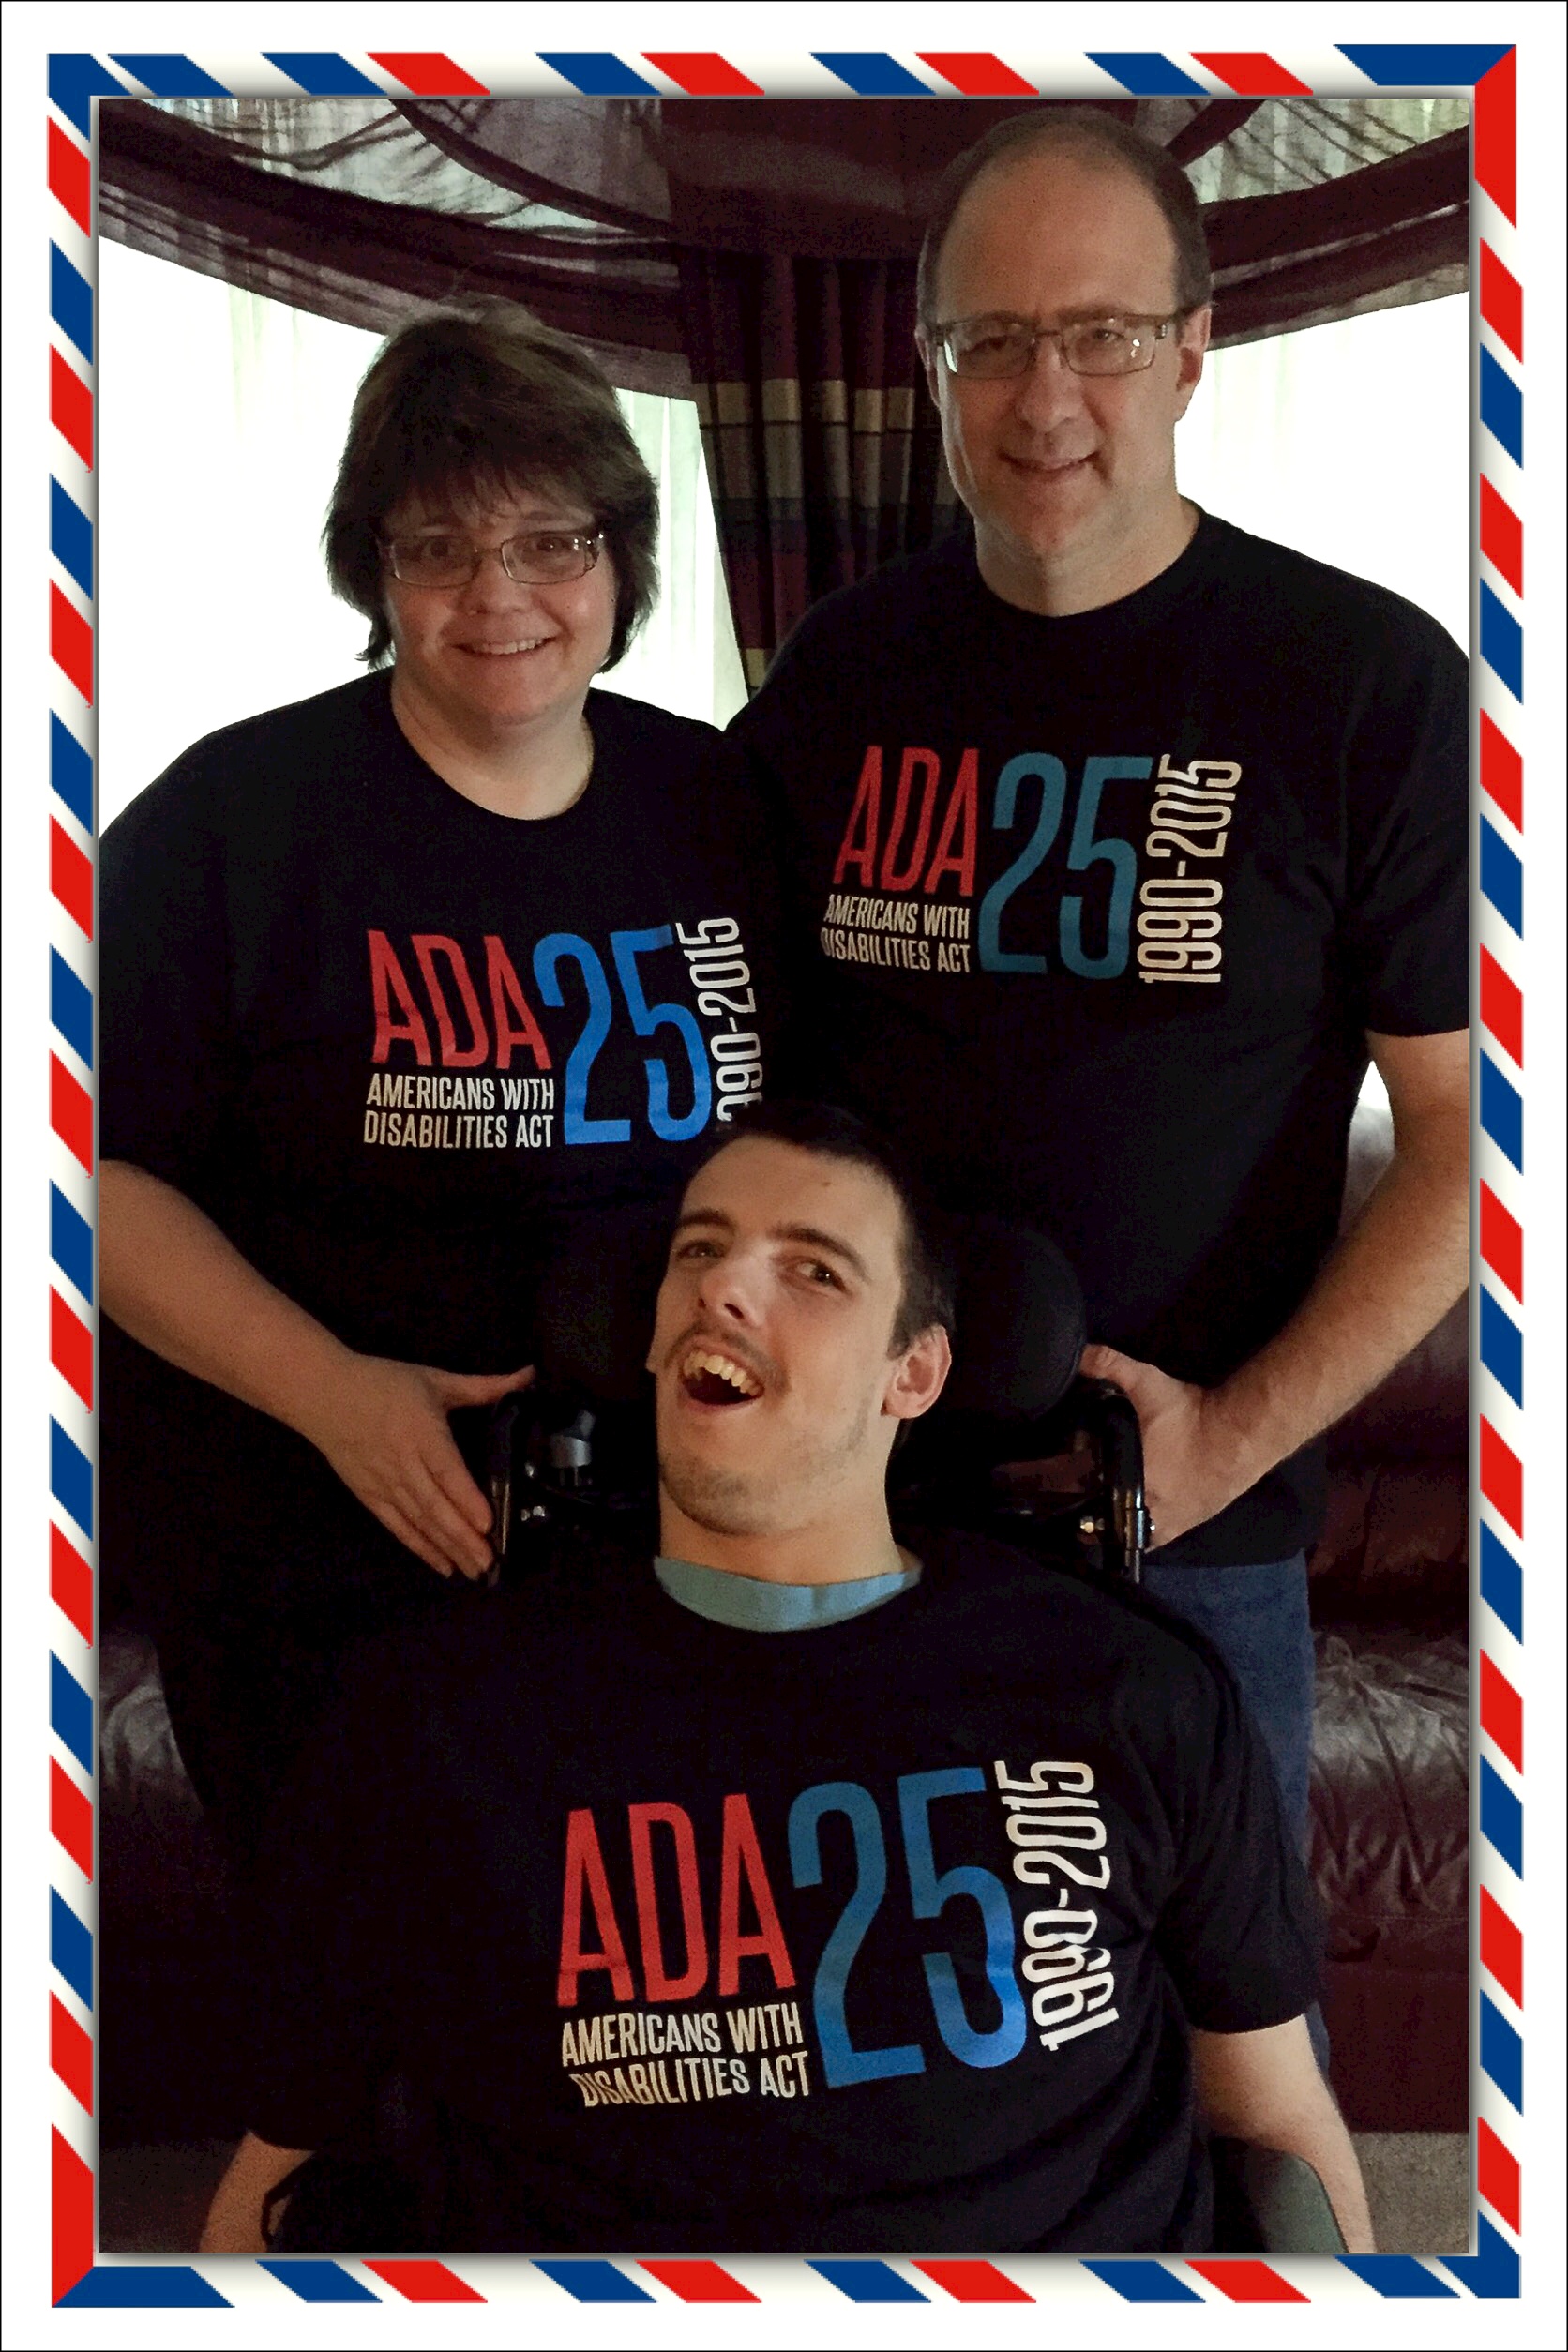 nick, julie, and julie's husband with their ada shirts